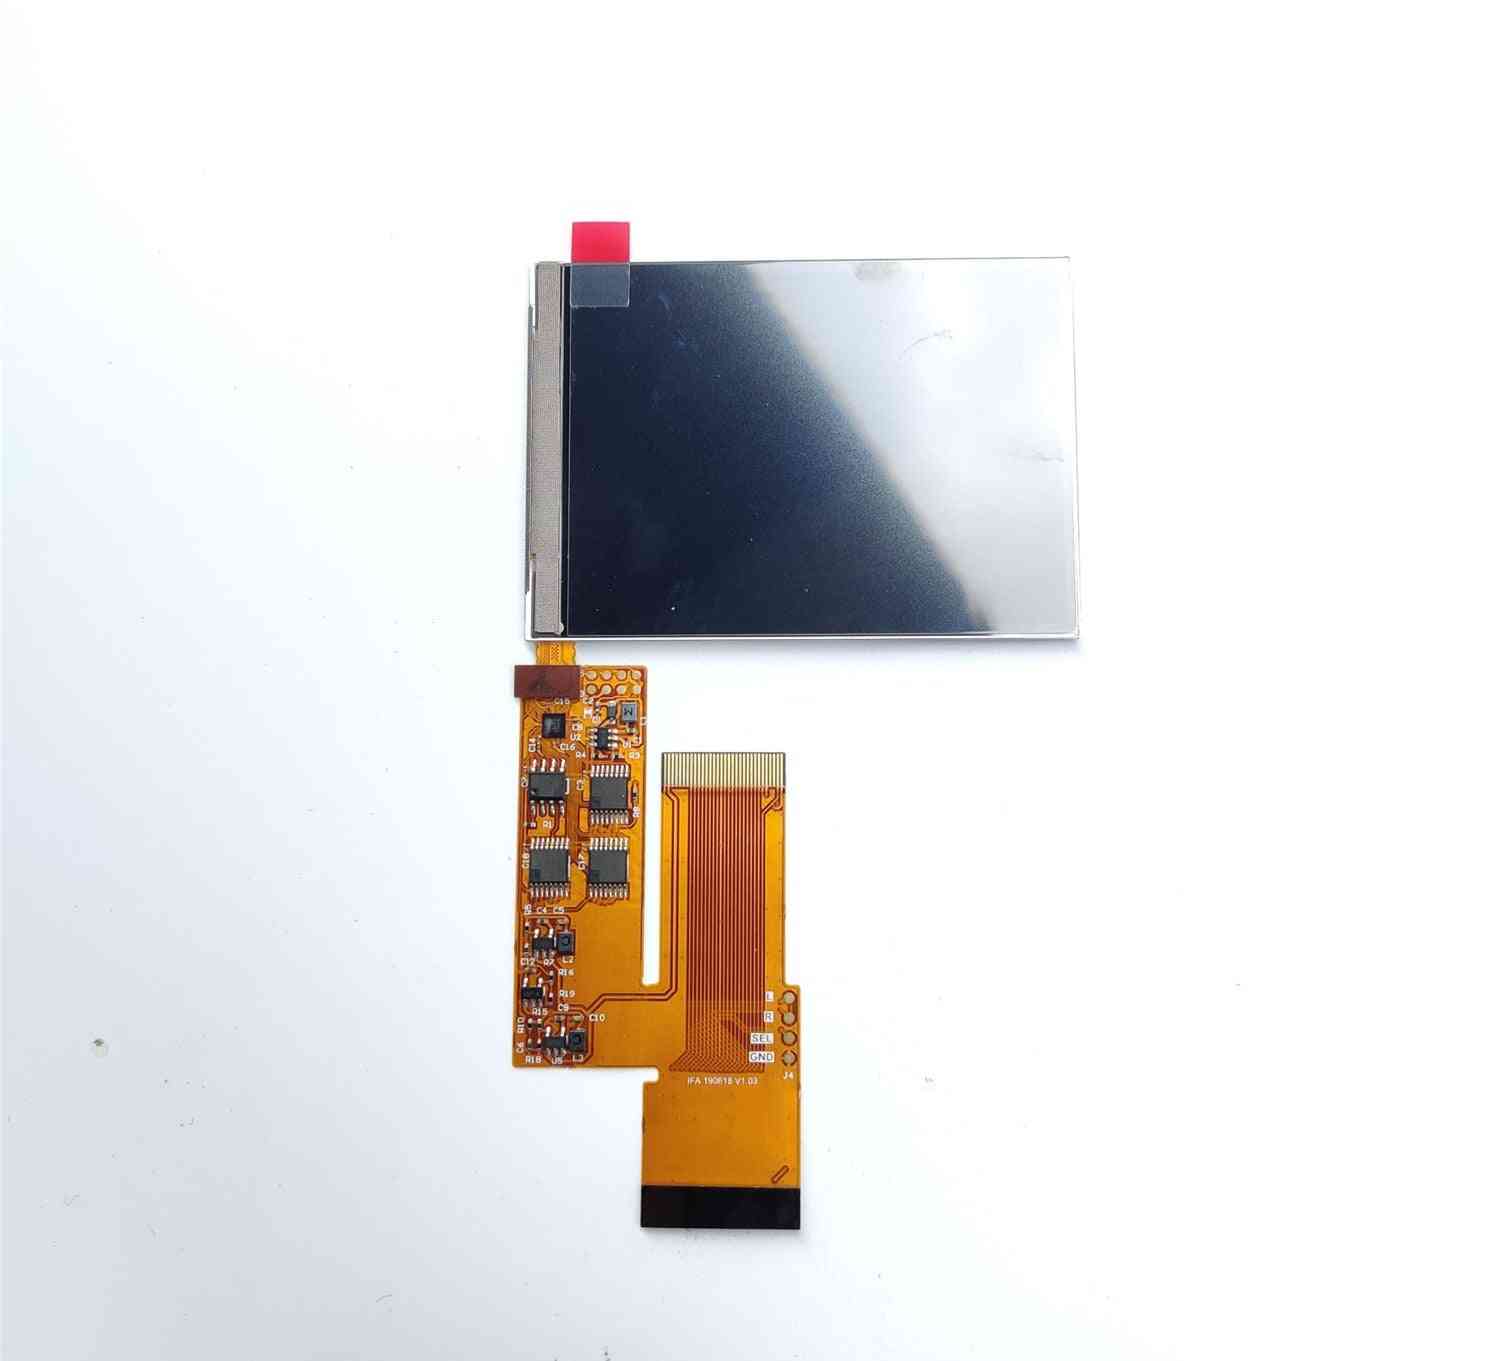 Lcd V3 Screen Replacement Kits